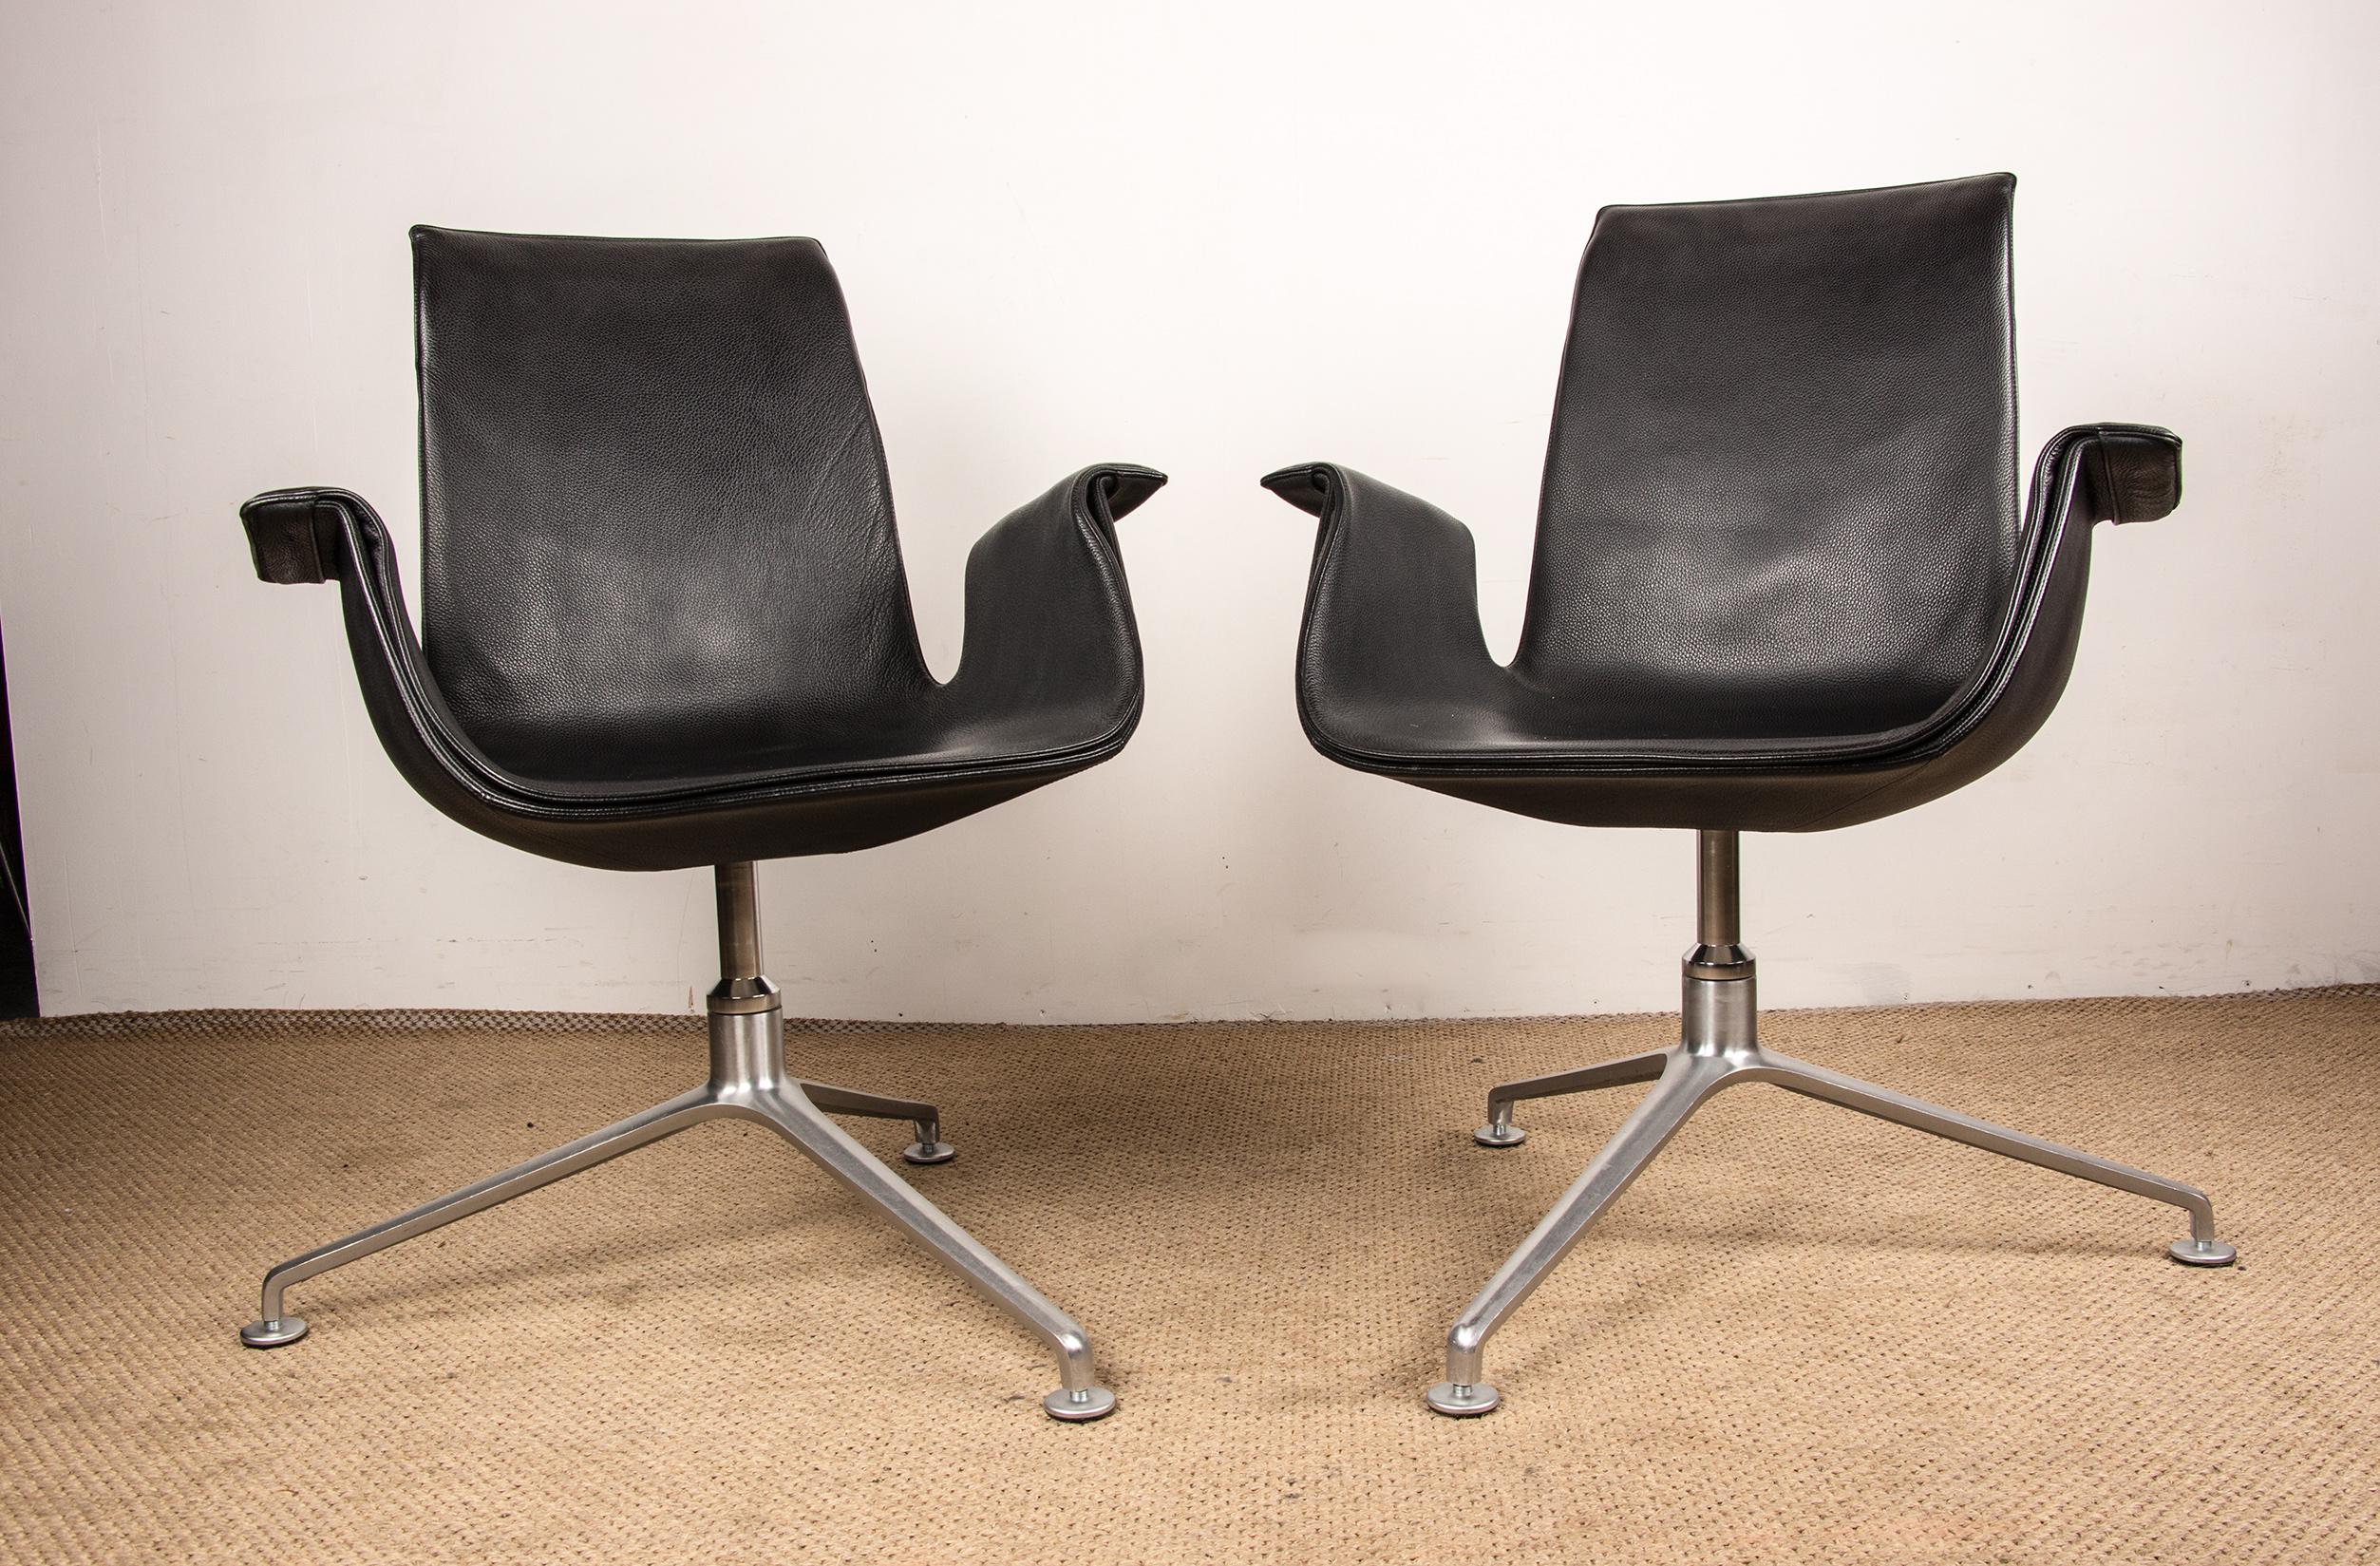 2 Danish deskchairs, Leather and steel, “Tulip chair” by Fabricius & Kalsthom. For Sale 2